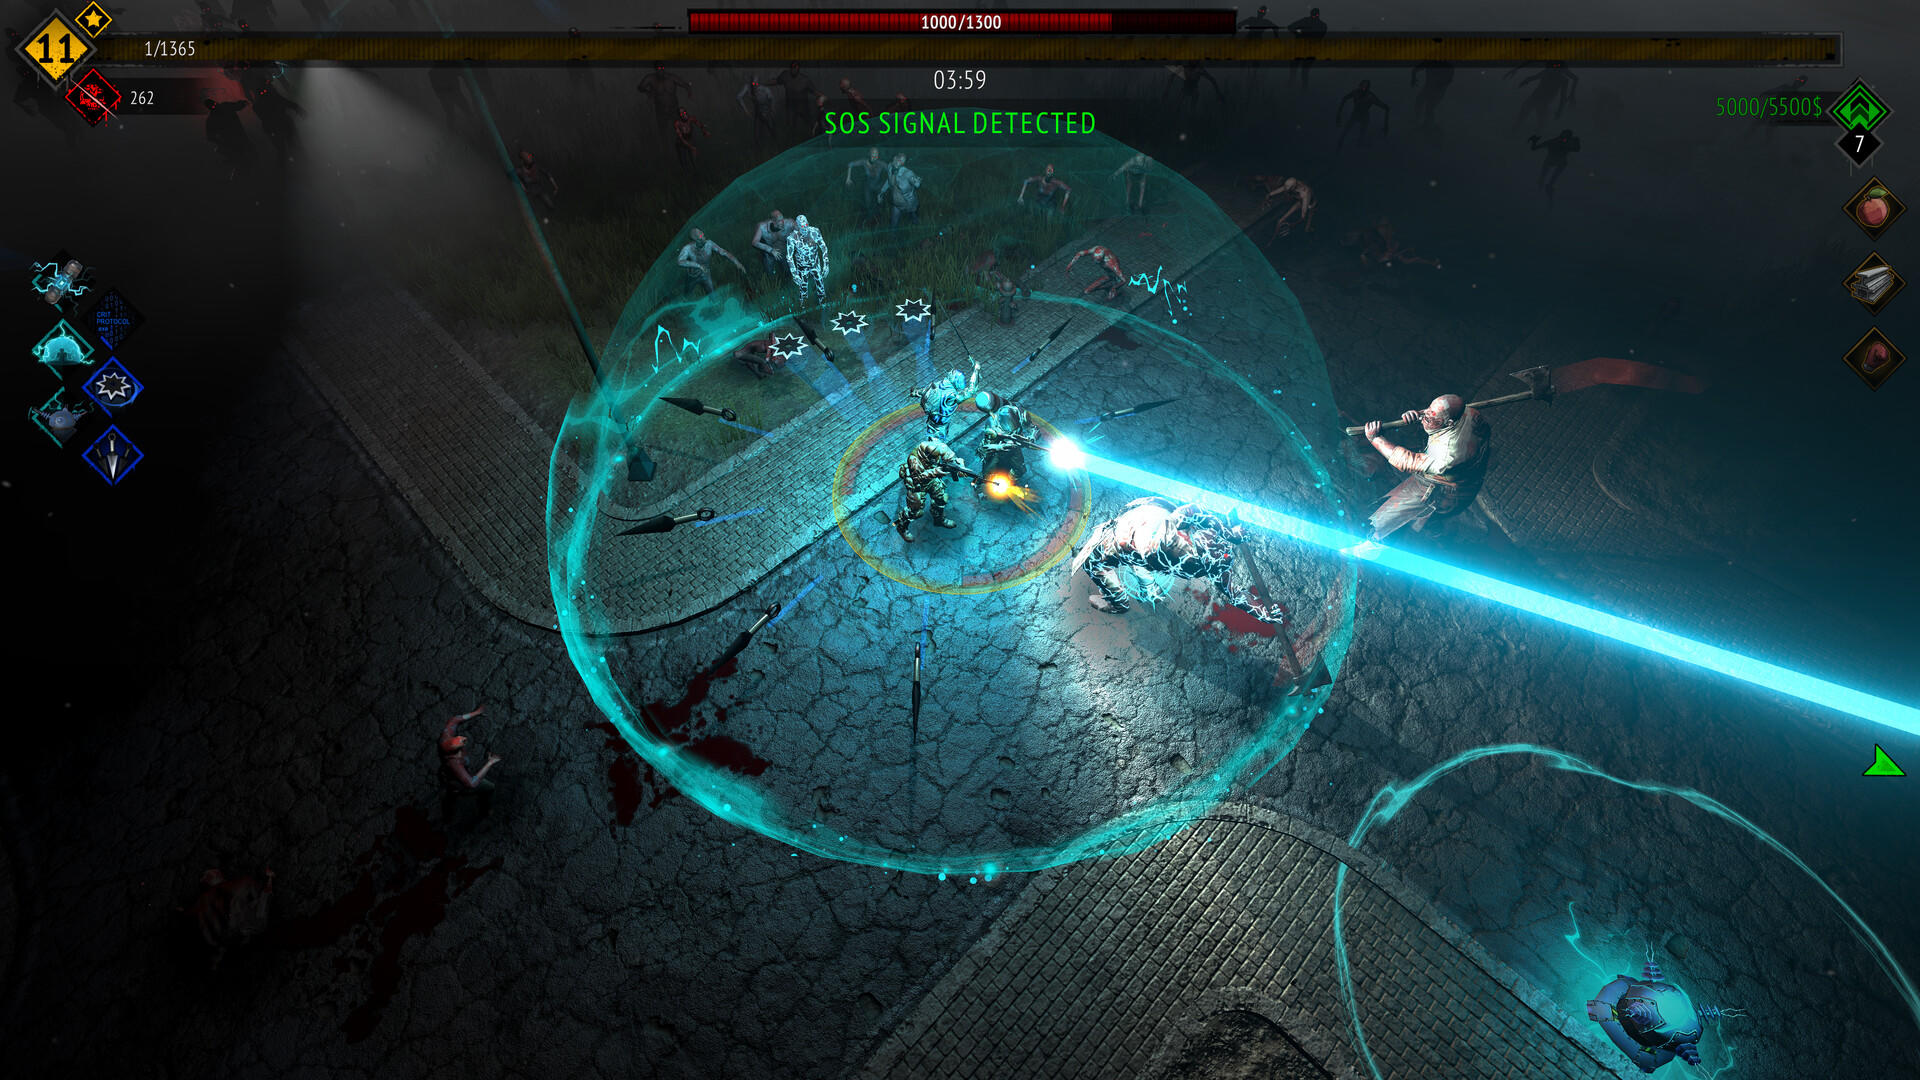 Yet Another Zombie Survivors screenshot game